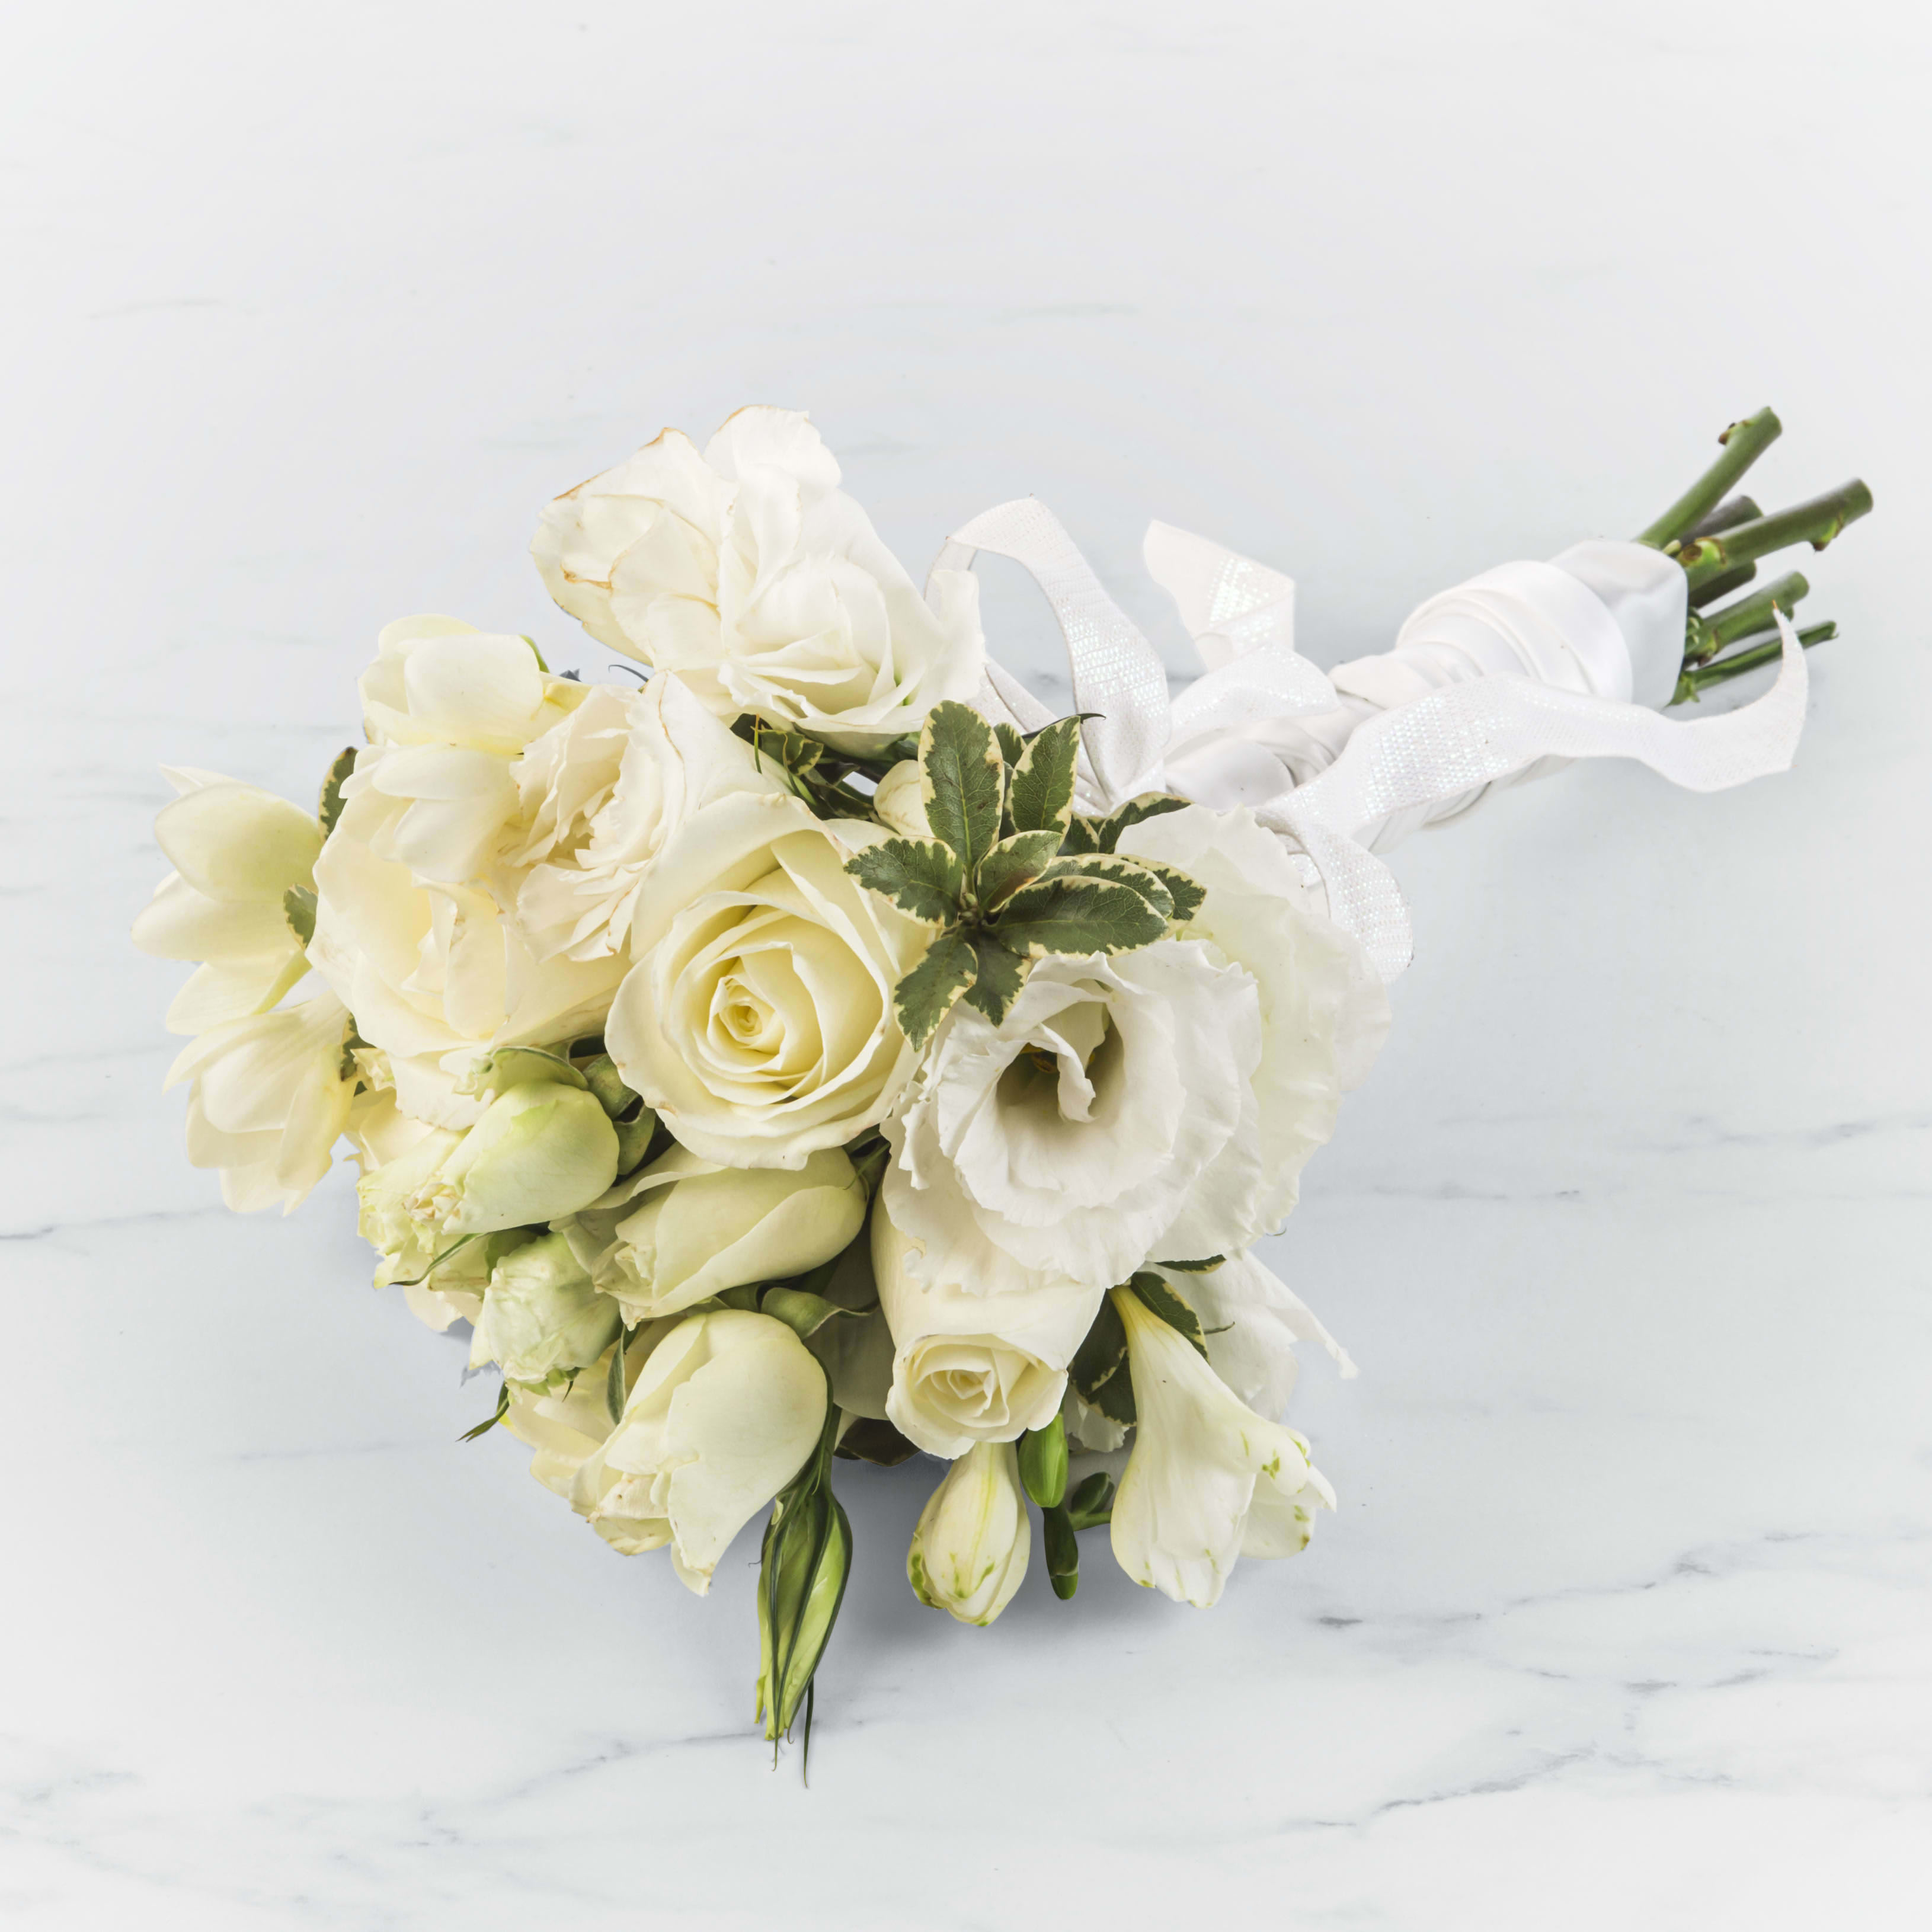 White Rose Bouquet by BloomNation™  - A classic dozen white rose bouquet hand tied with ribbon. The perfect accessory for any formal event including proms, weddings, and debutante balls.  